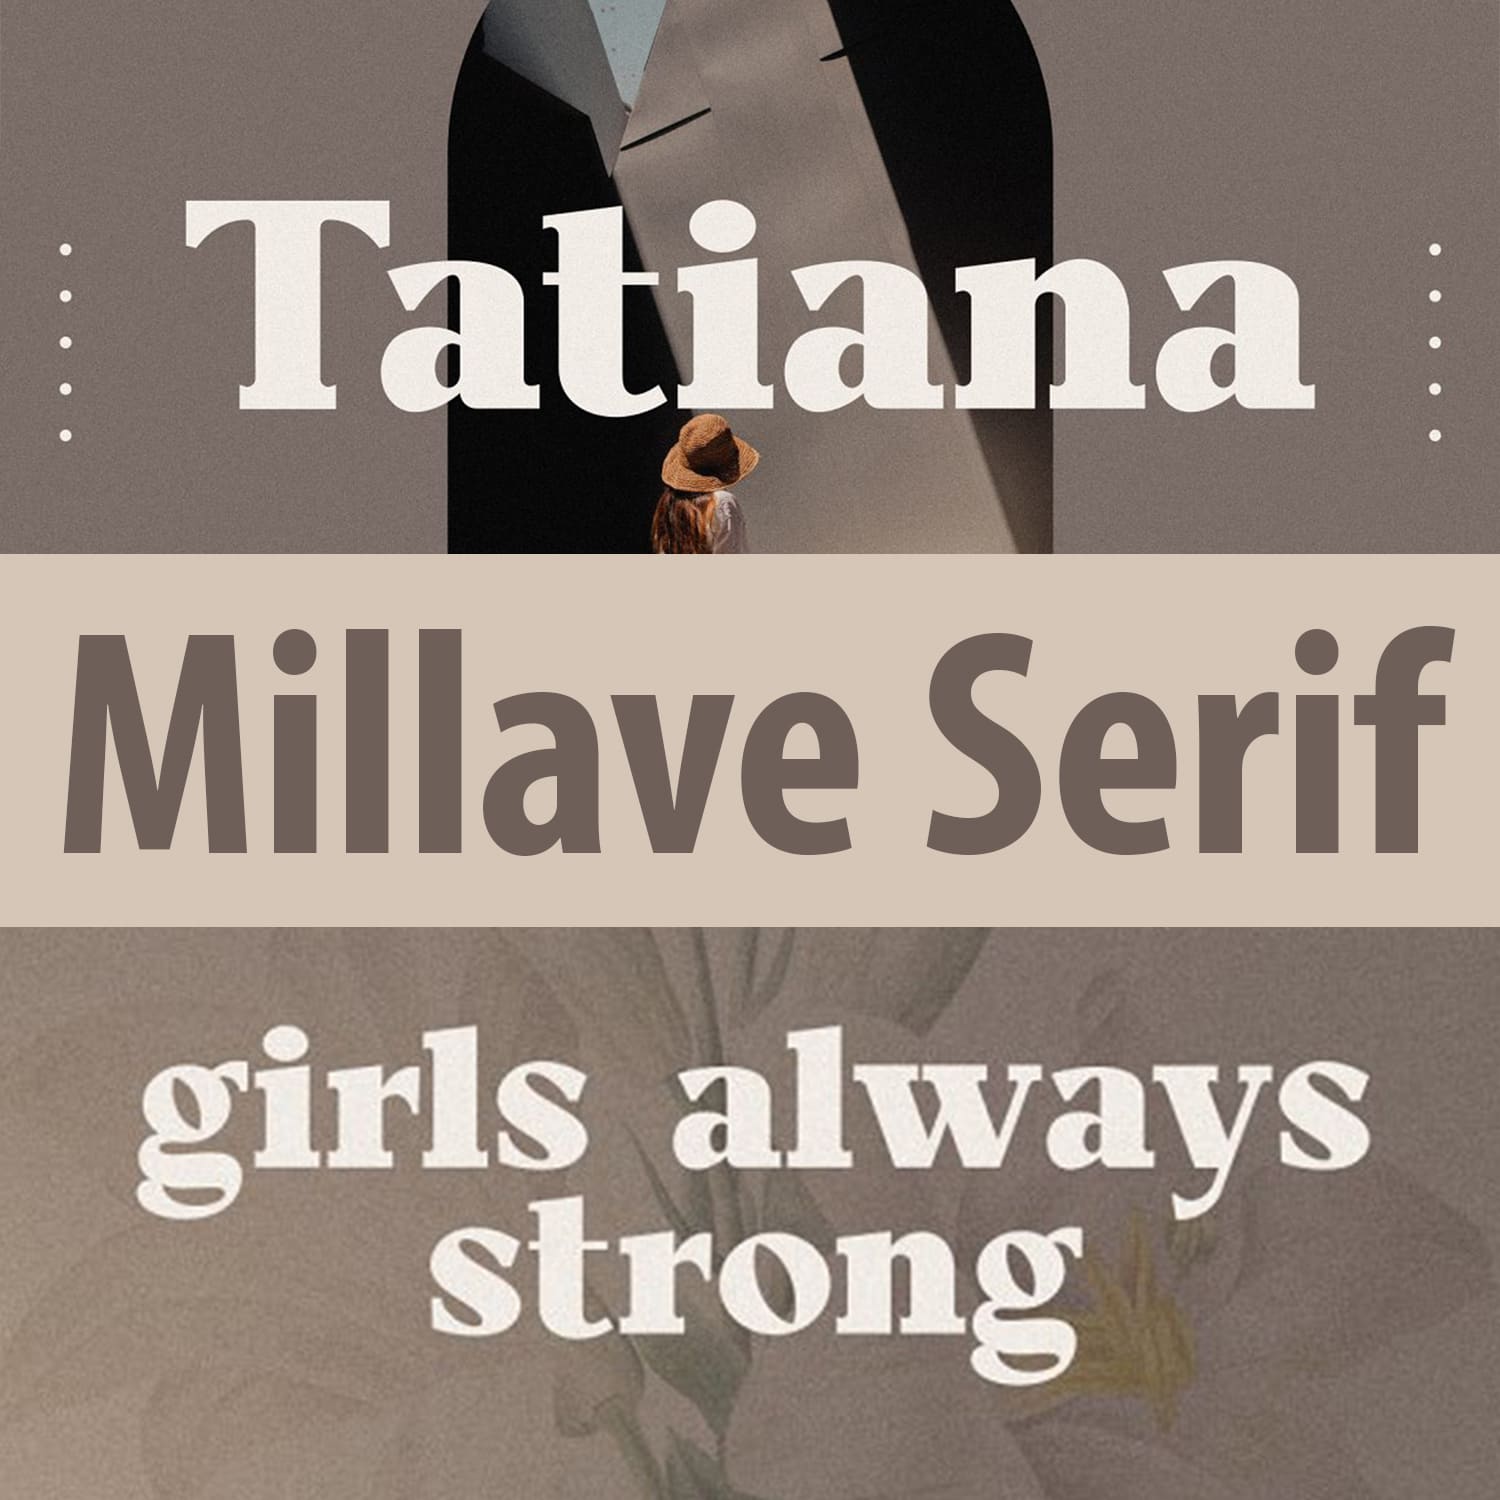 Millave Serif Preview - A Bold Serif Font "Girls Always Strong".